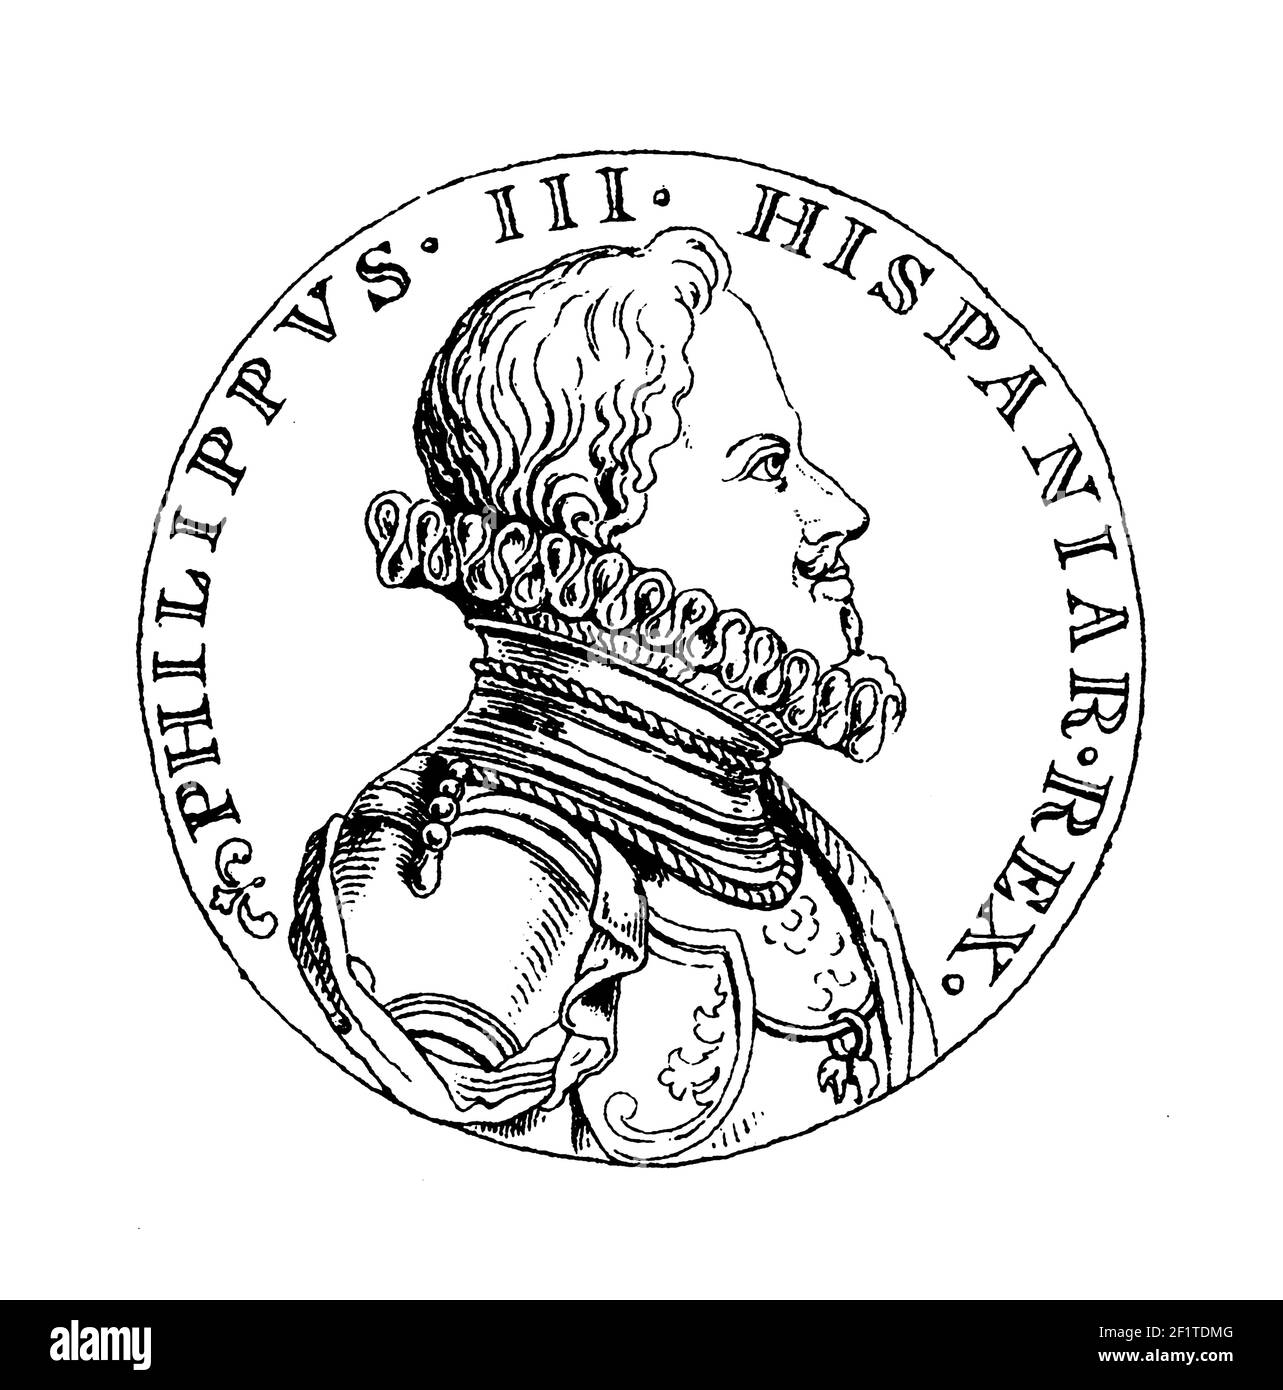 Antique 19th-century illustration of a portrait of Philip III, King of Spain and King of Portugal and the Algarves. Born on April 14, 1578 in Madrid, Stock Photo